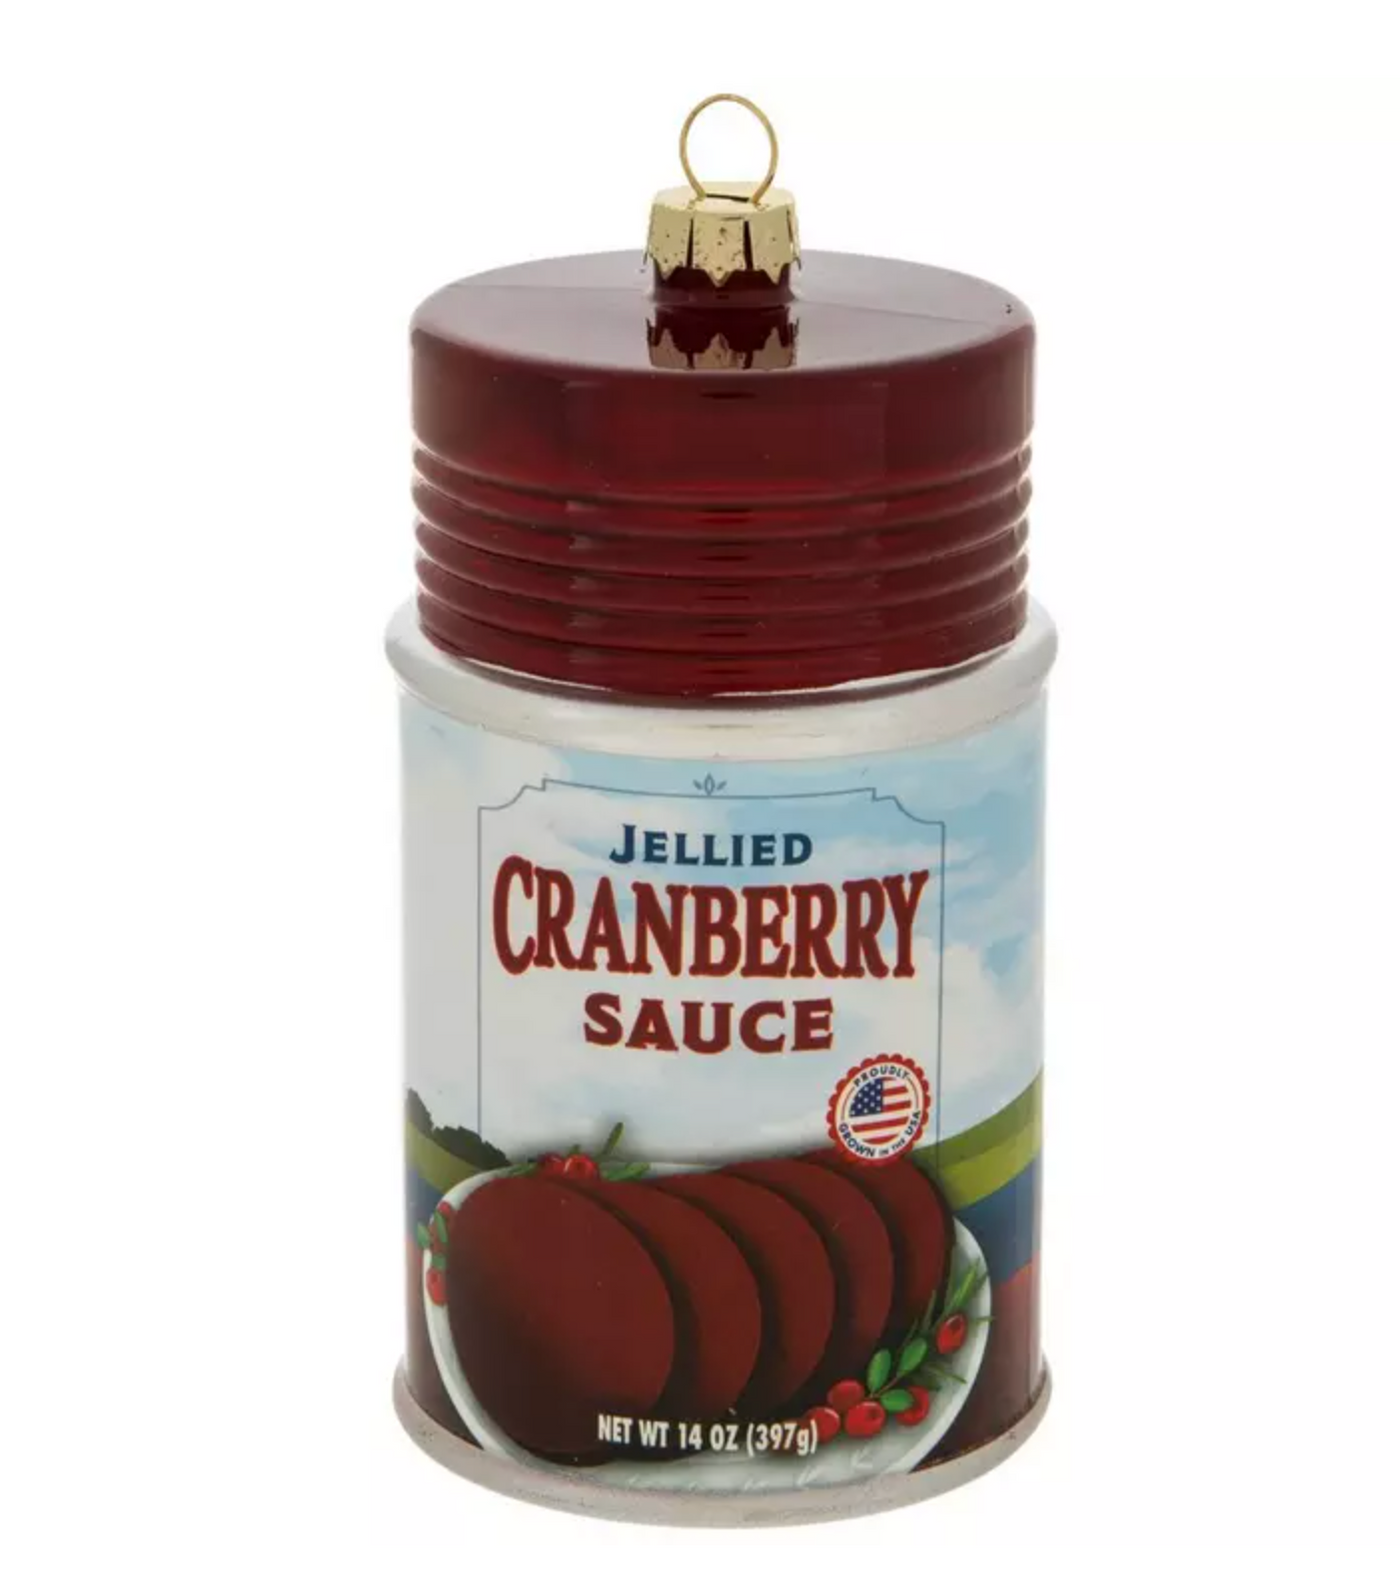 Robert Stanley Jellied Cranberry Sauce Glass Christmas Ornament New with Tag